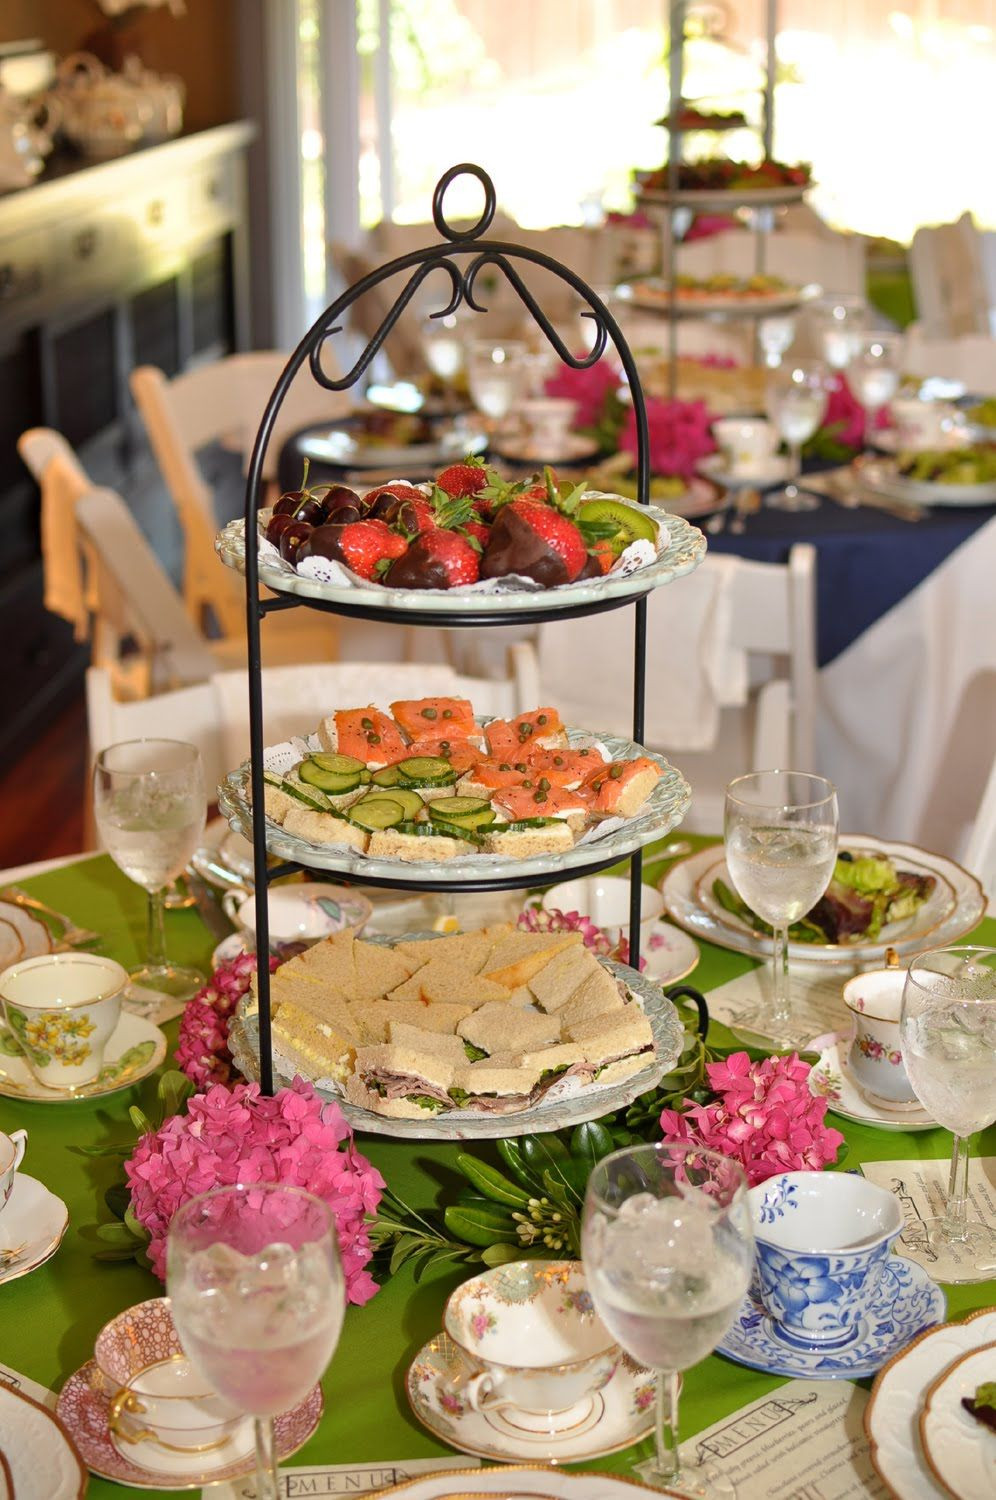 Bridal Shower Tea Party Food Ideas
 This is how we do it